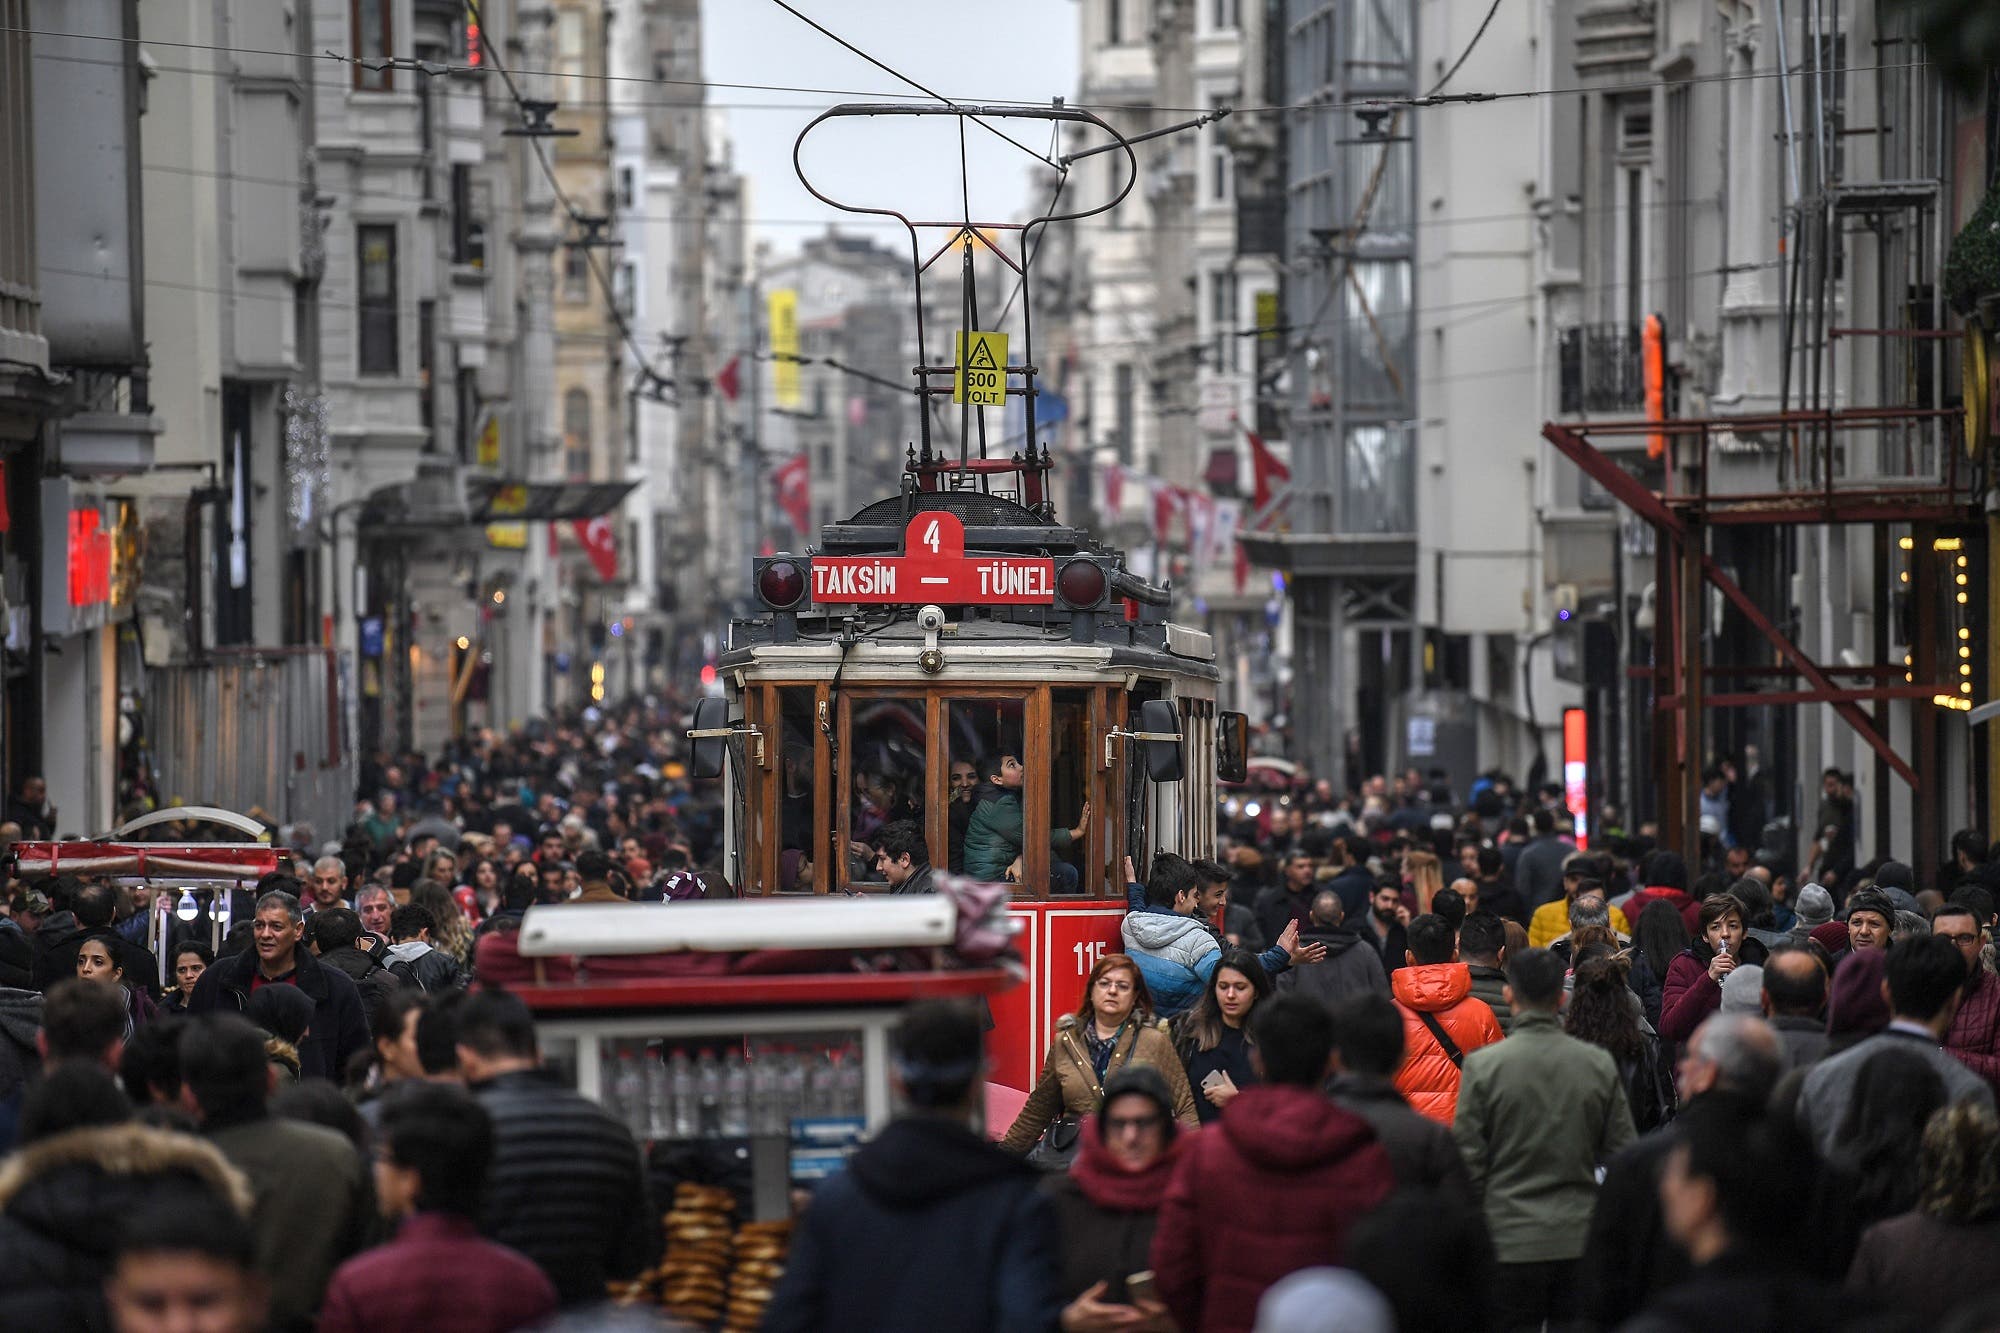 Turkey’s economy entered its first recession in a decade, just weeks before President Recep Tayyip Erdogan’s government faces local elections. (File photo: AFP)